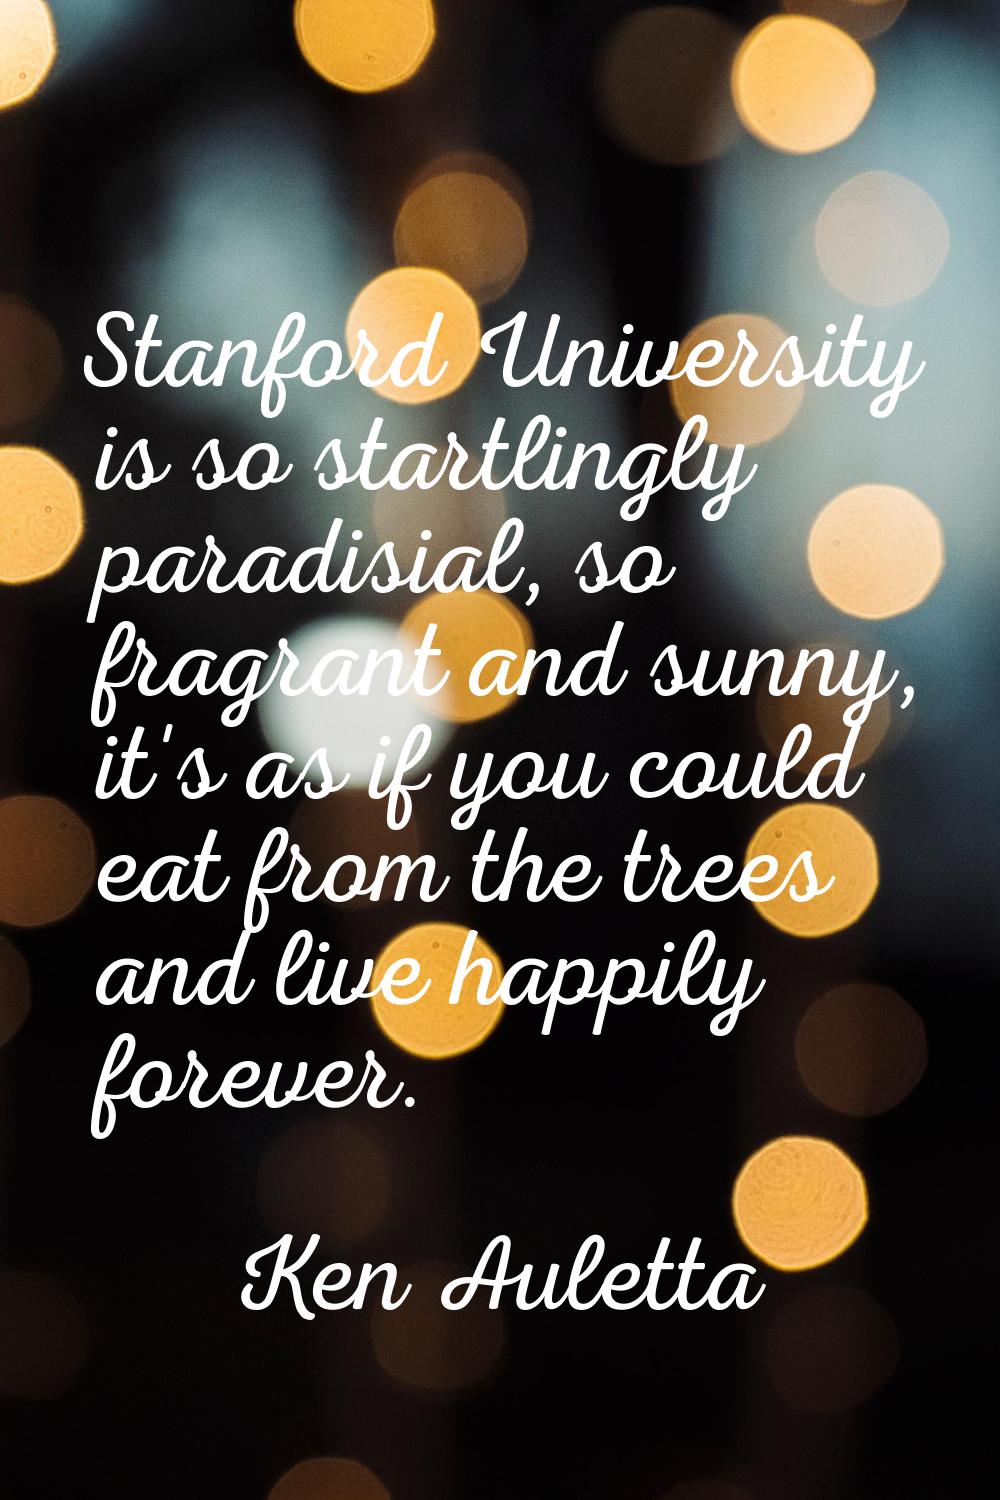 Stanford University is so startlingly paradisial, so fragrant and sunny, it's as if you could eat f